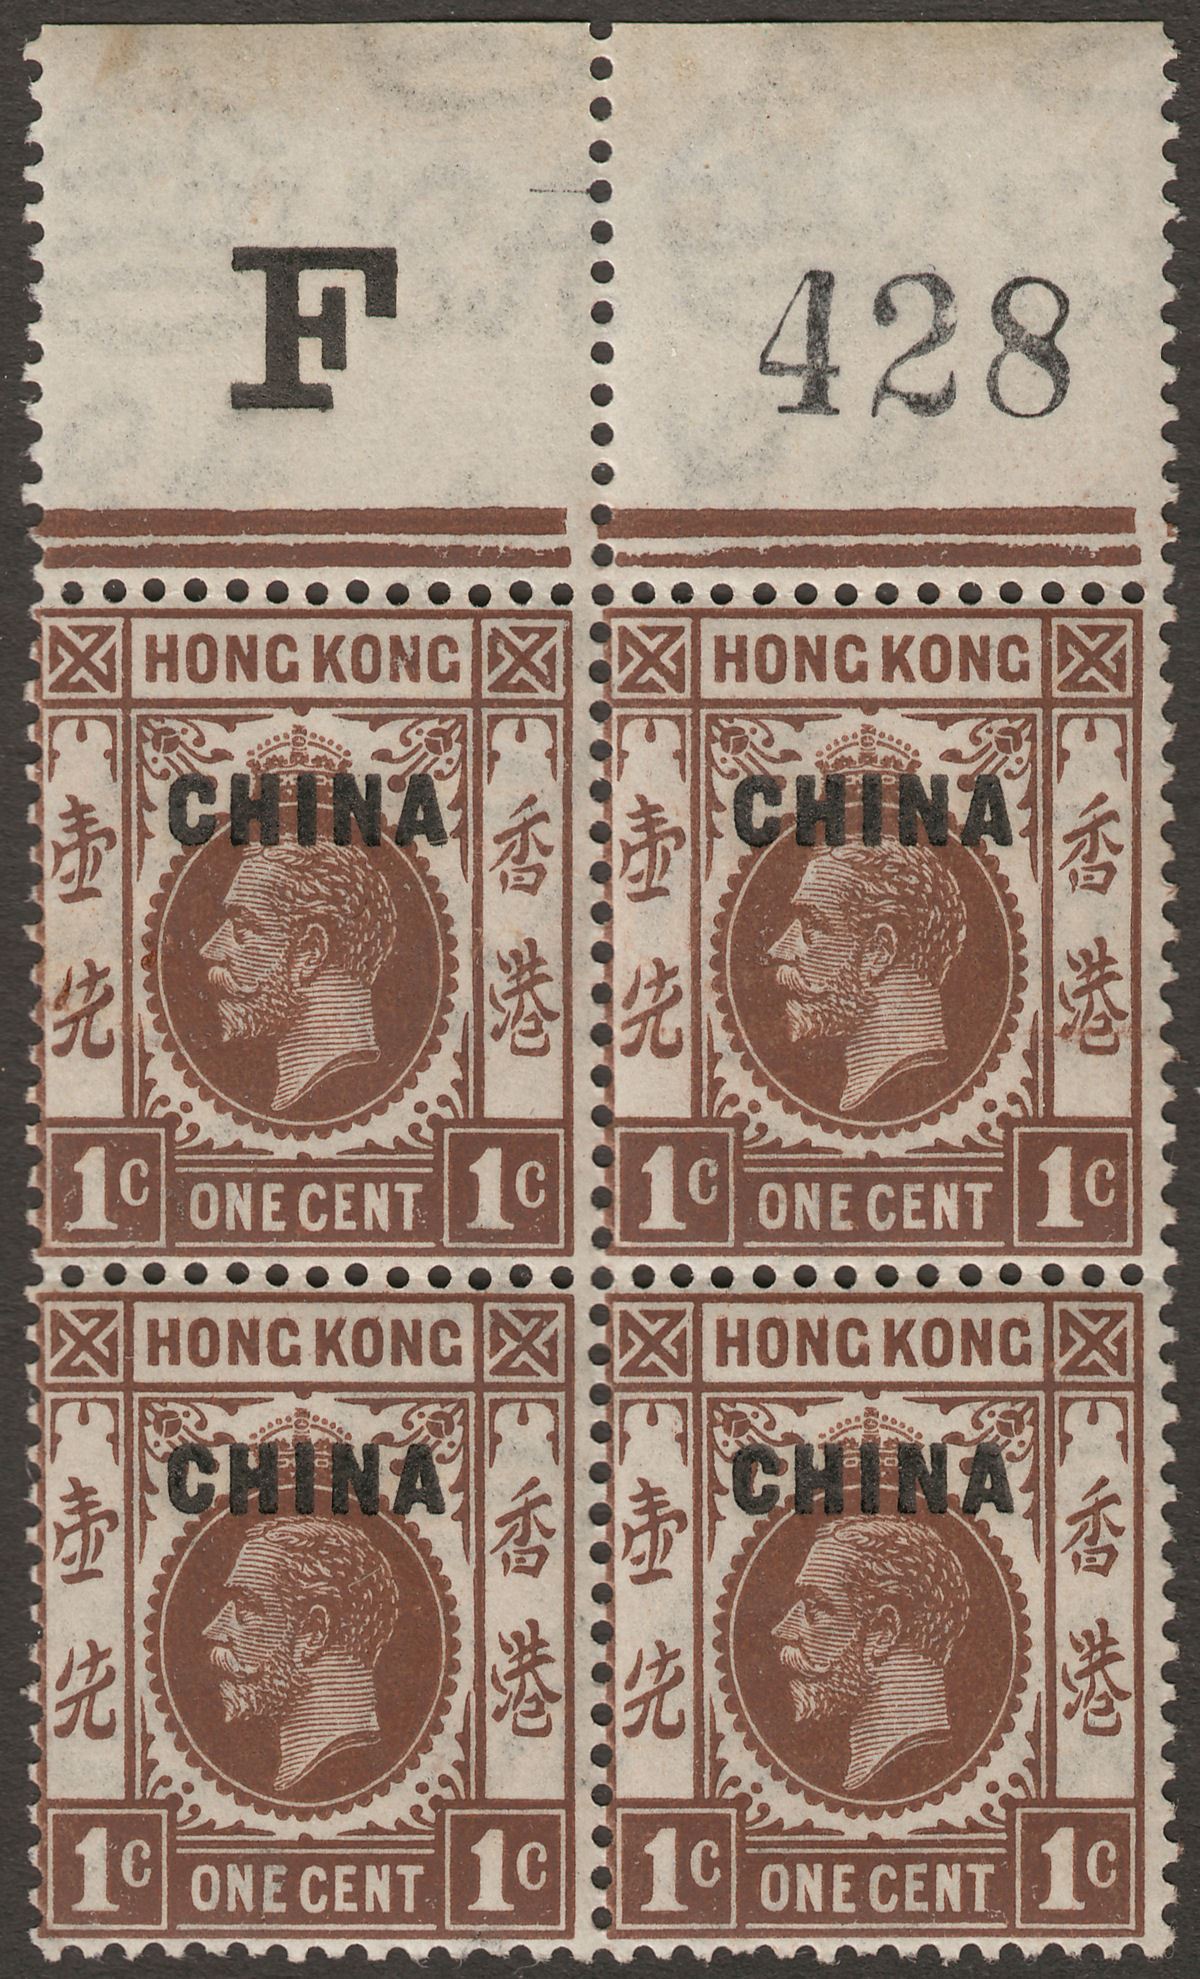 Hong Kong 1923 KGV CHINA Overprint 1c Block with Requisition F Letter Mint SG18